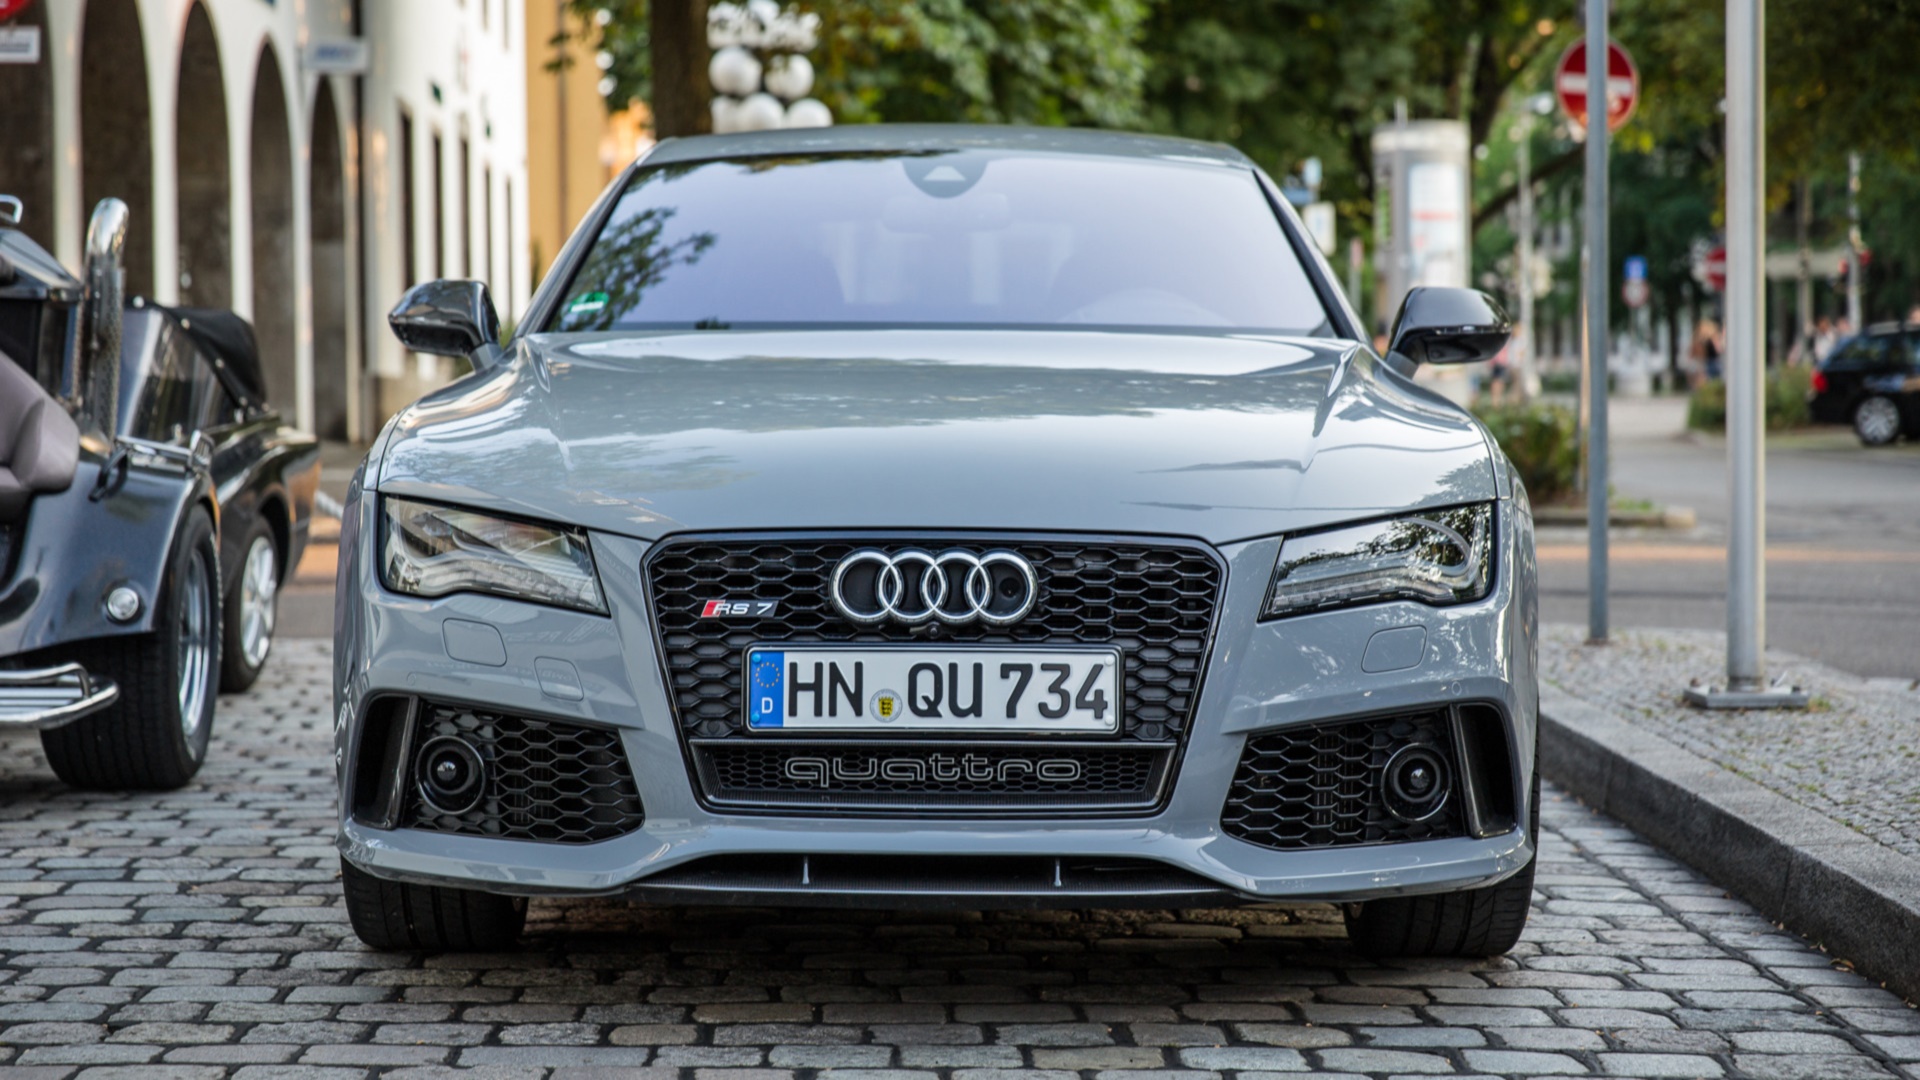 Vehicles Audi RS7 HD Wallpaper | Background Image